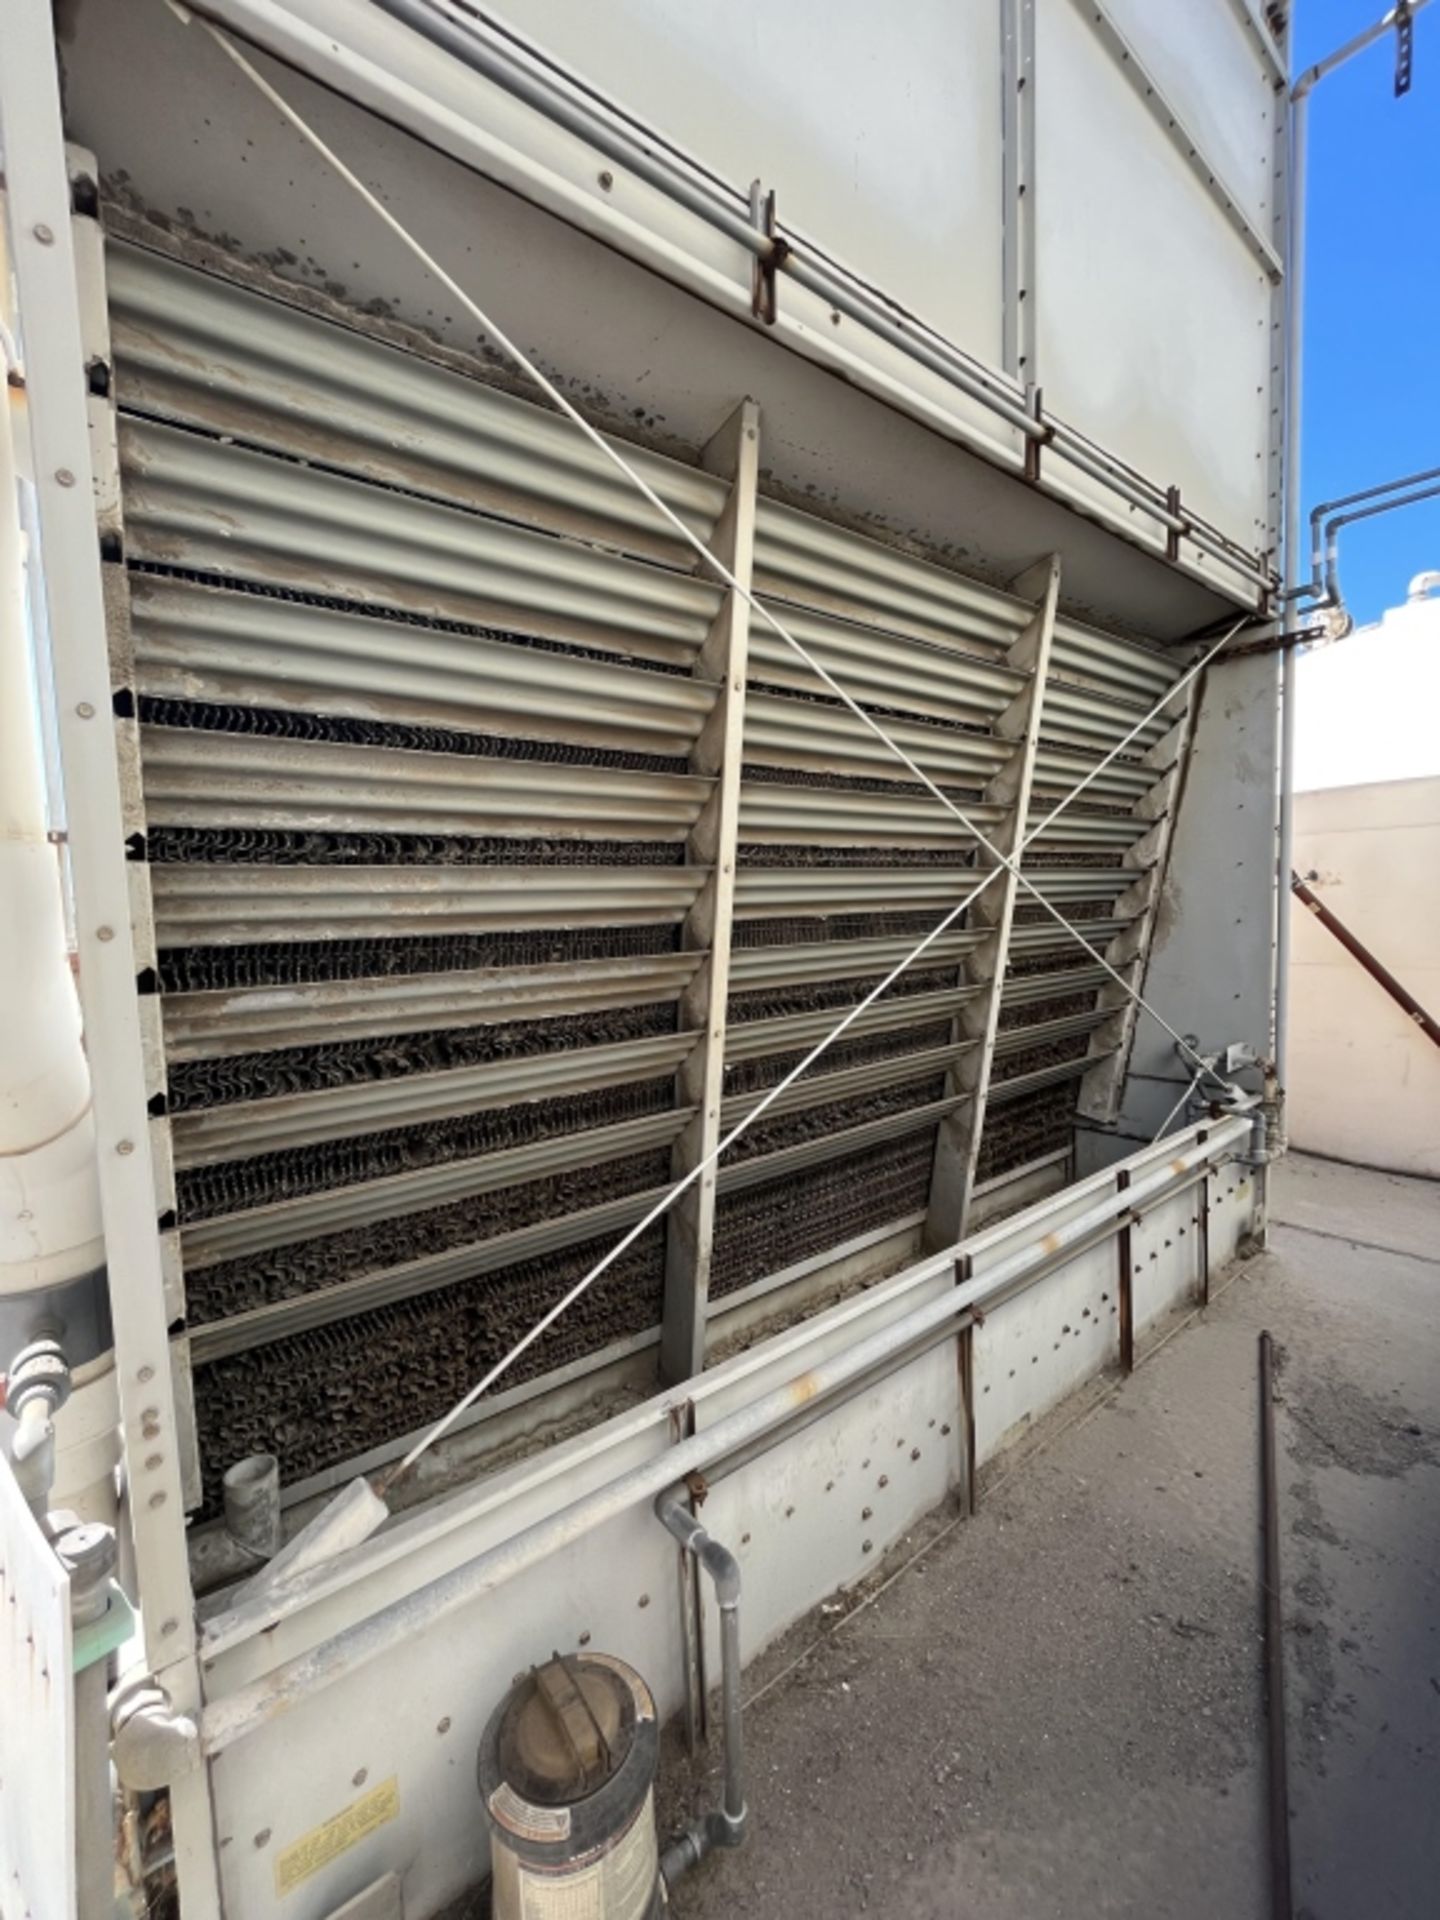 BAC Cooling Tower - Image 4 of 14